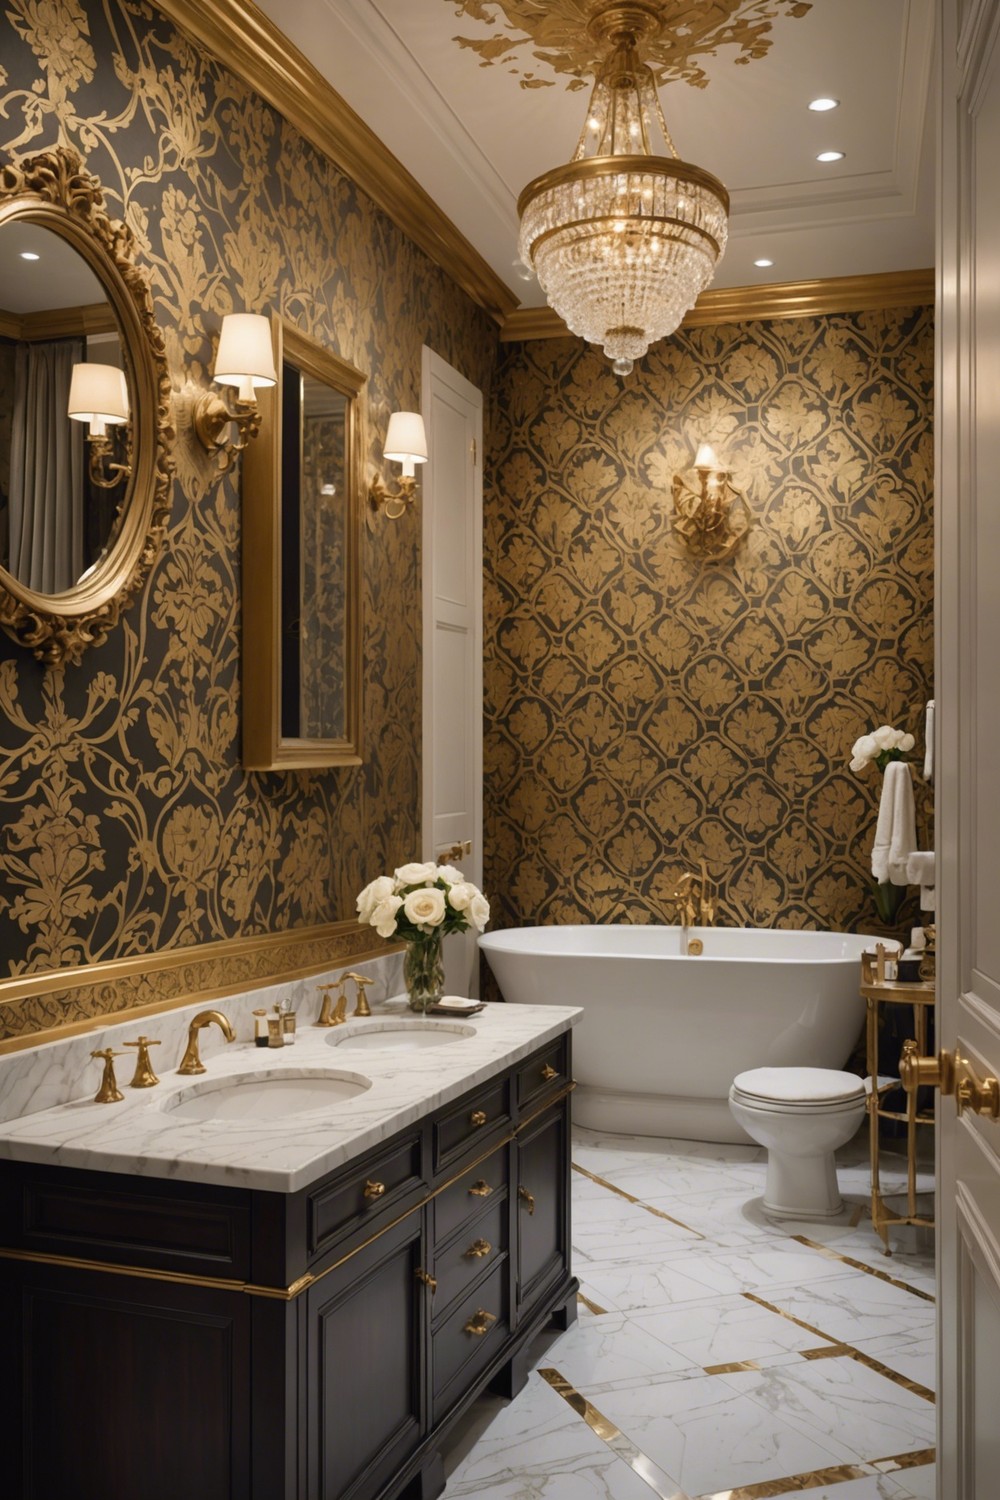 Royal Treatment: Luxury Bathroom Wallpaper Designs with Gold Accents